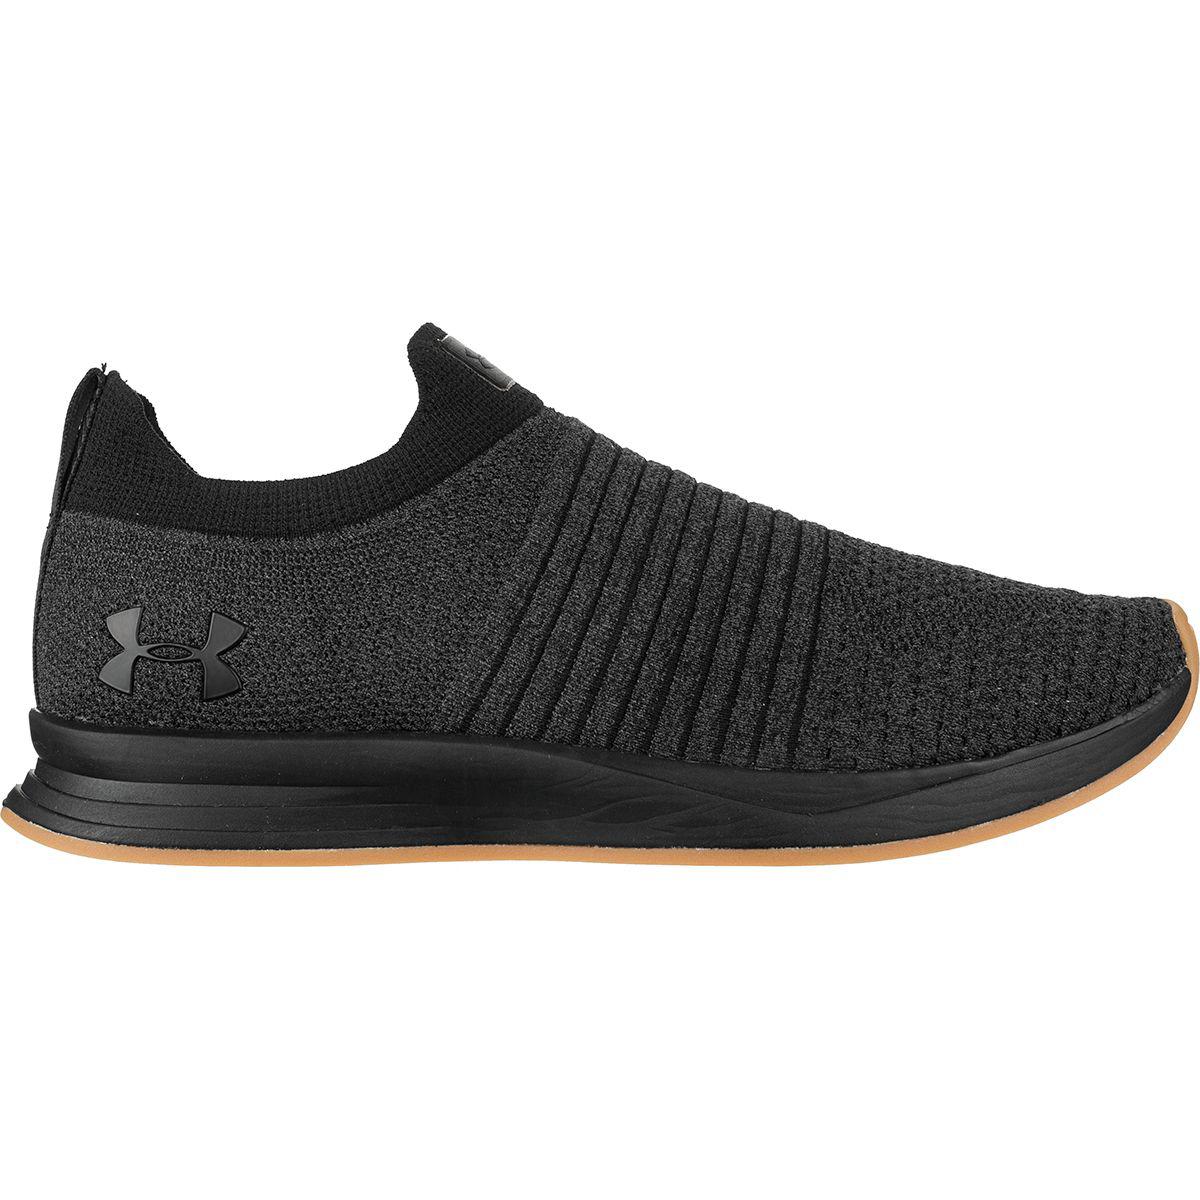 Charged Covert X Laceless Shoe in Black 